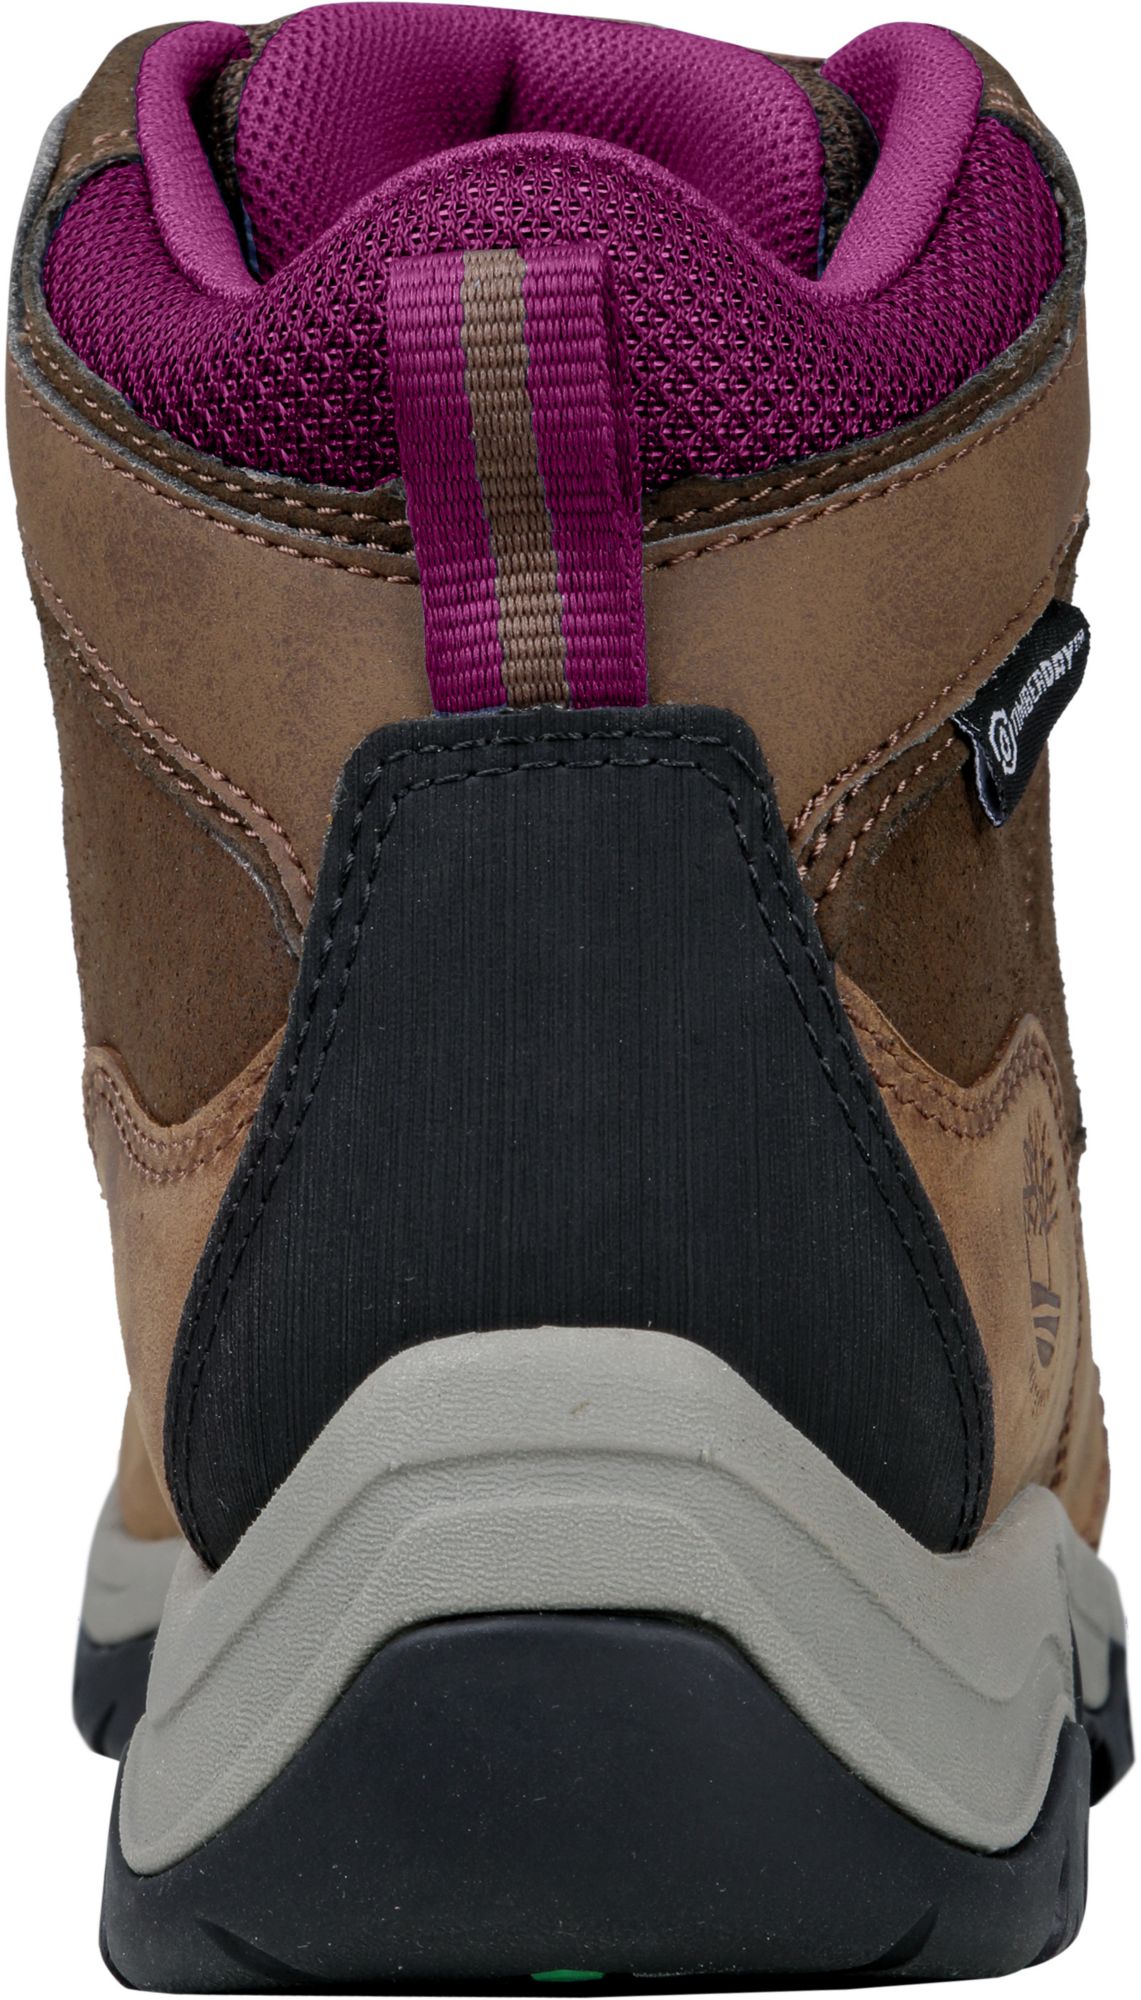 timberland mt maddsen womens review